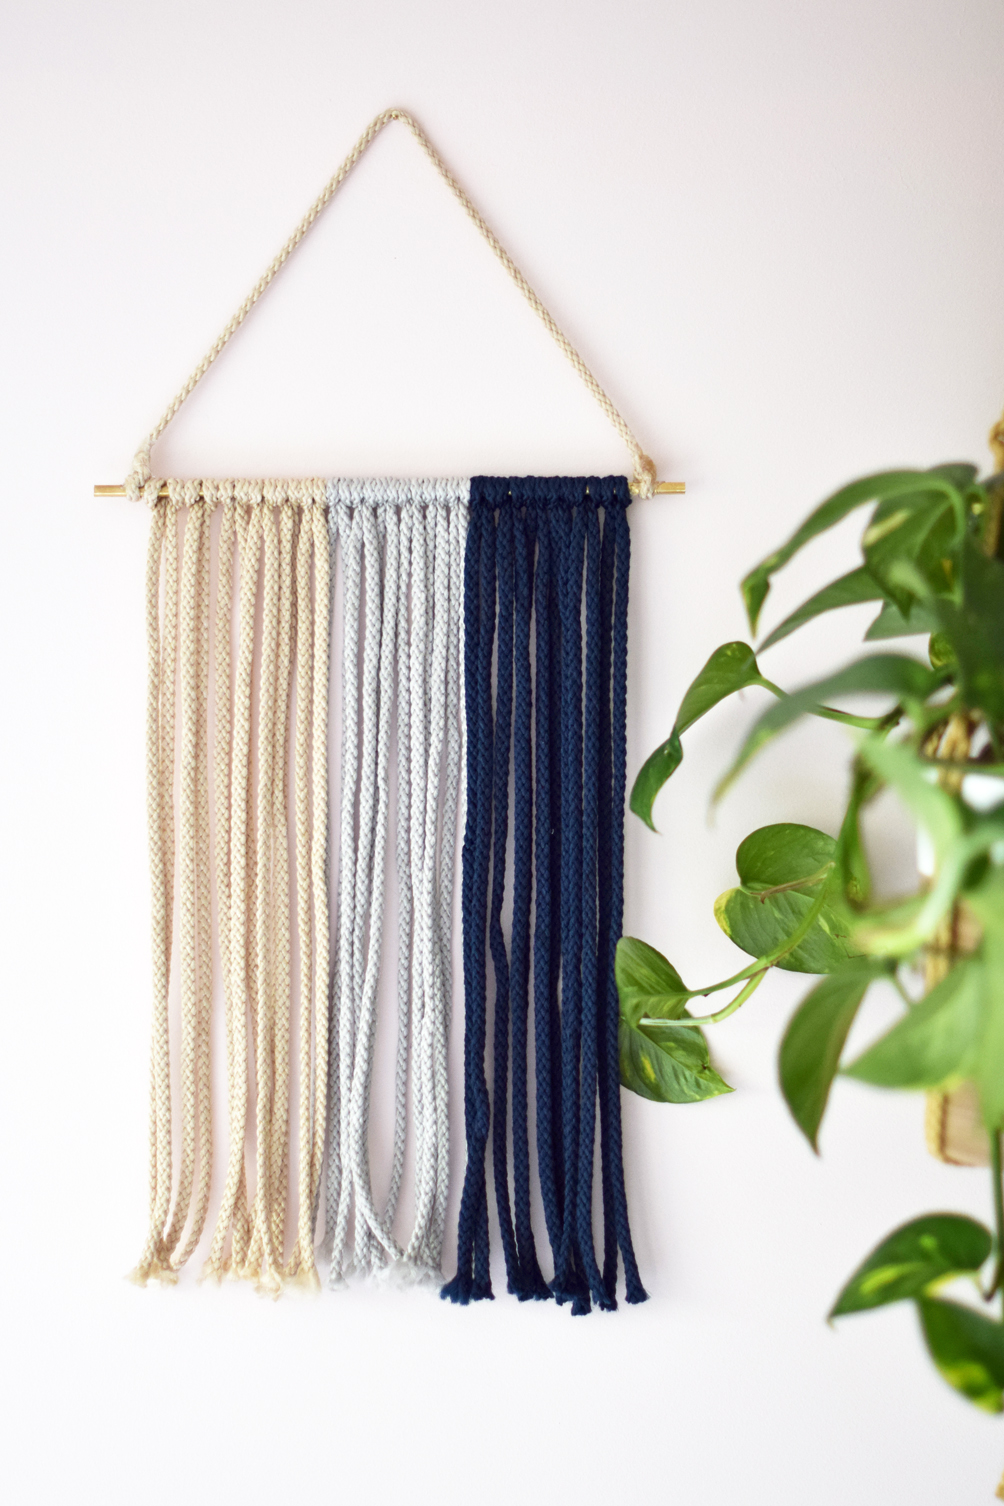 lifestyle blogger Leslie Musser shares an easy diy macrame wall hanging to update your home decor on one brass fox